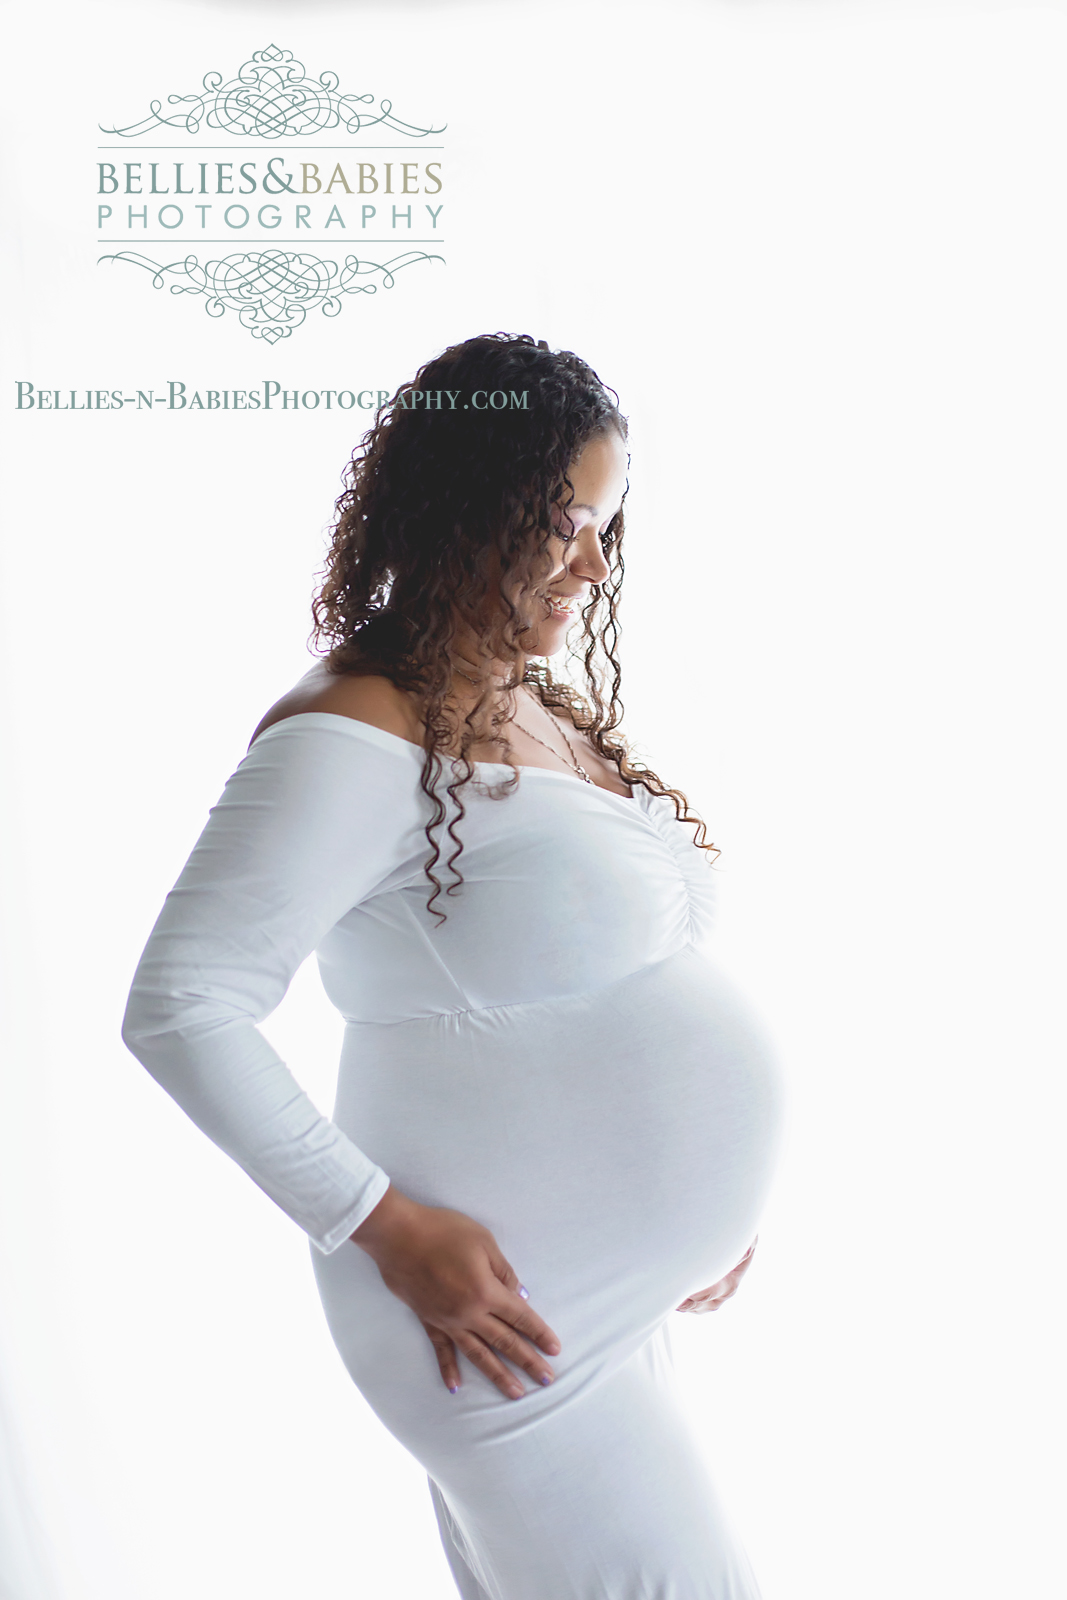 Bellies & Babies Photography